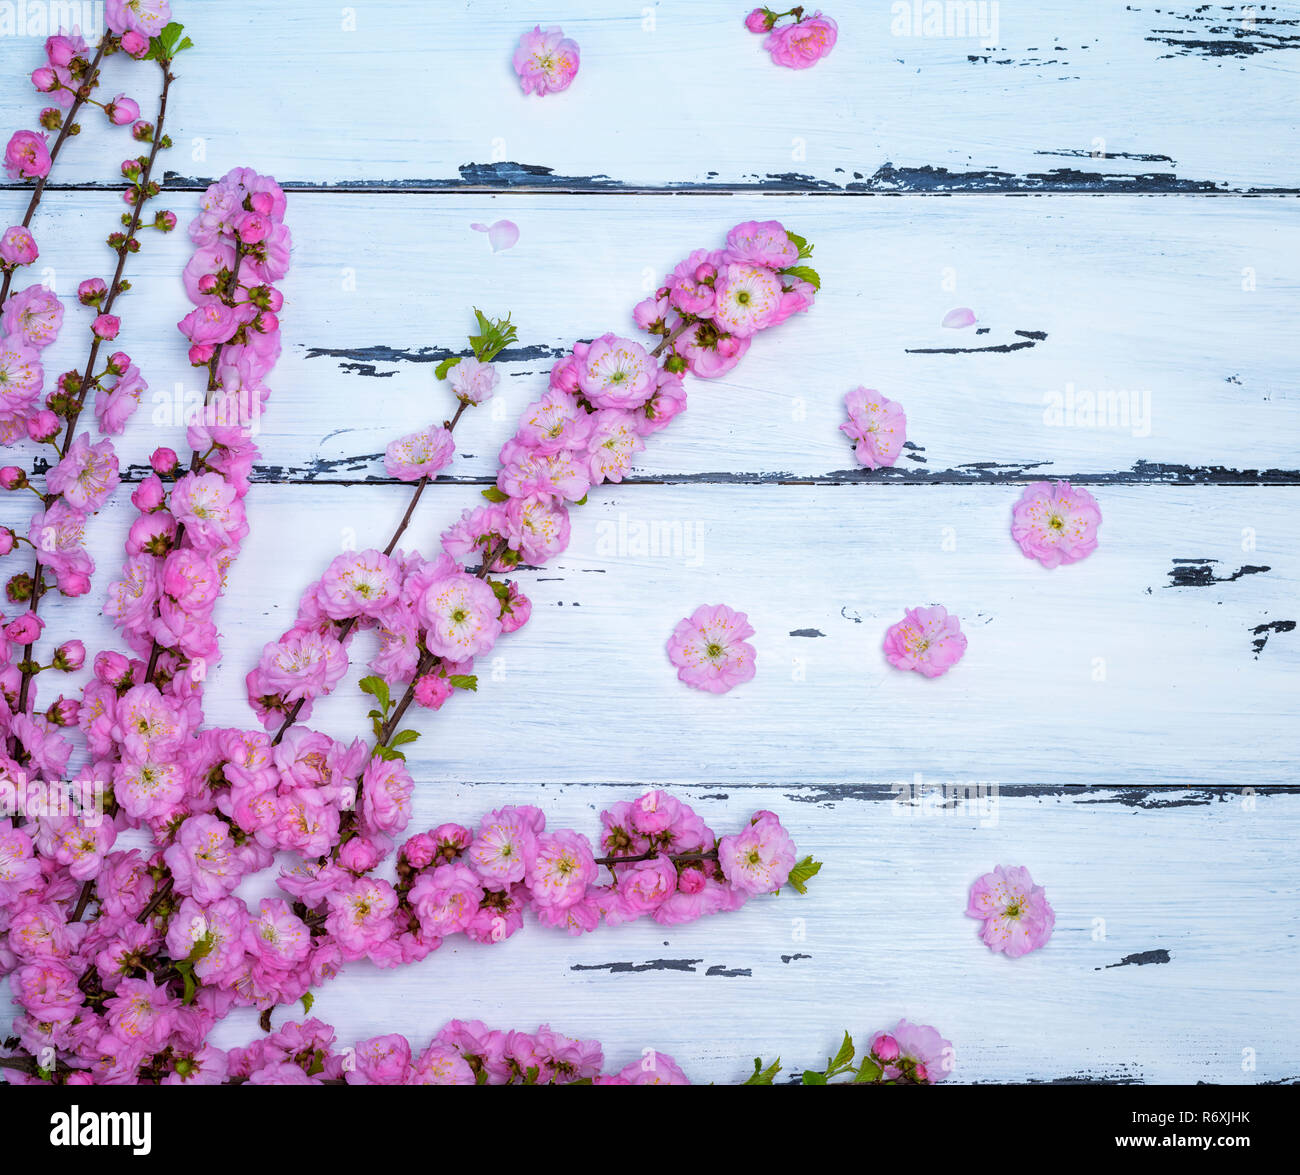 branches with pink flowers Louiseania triloba Stock Photo